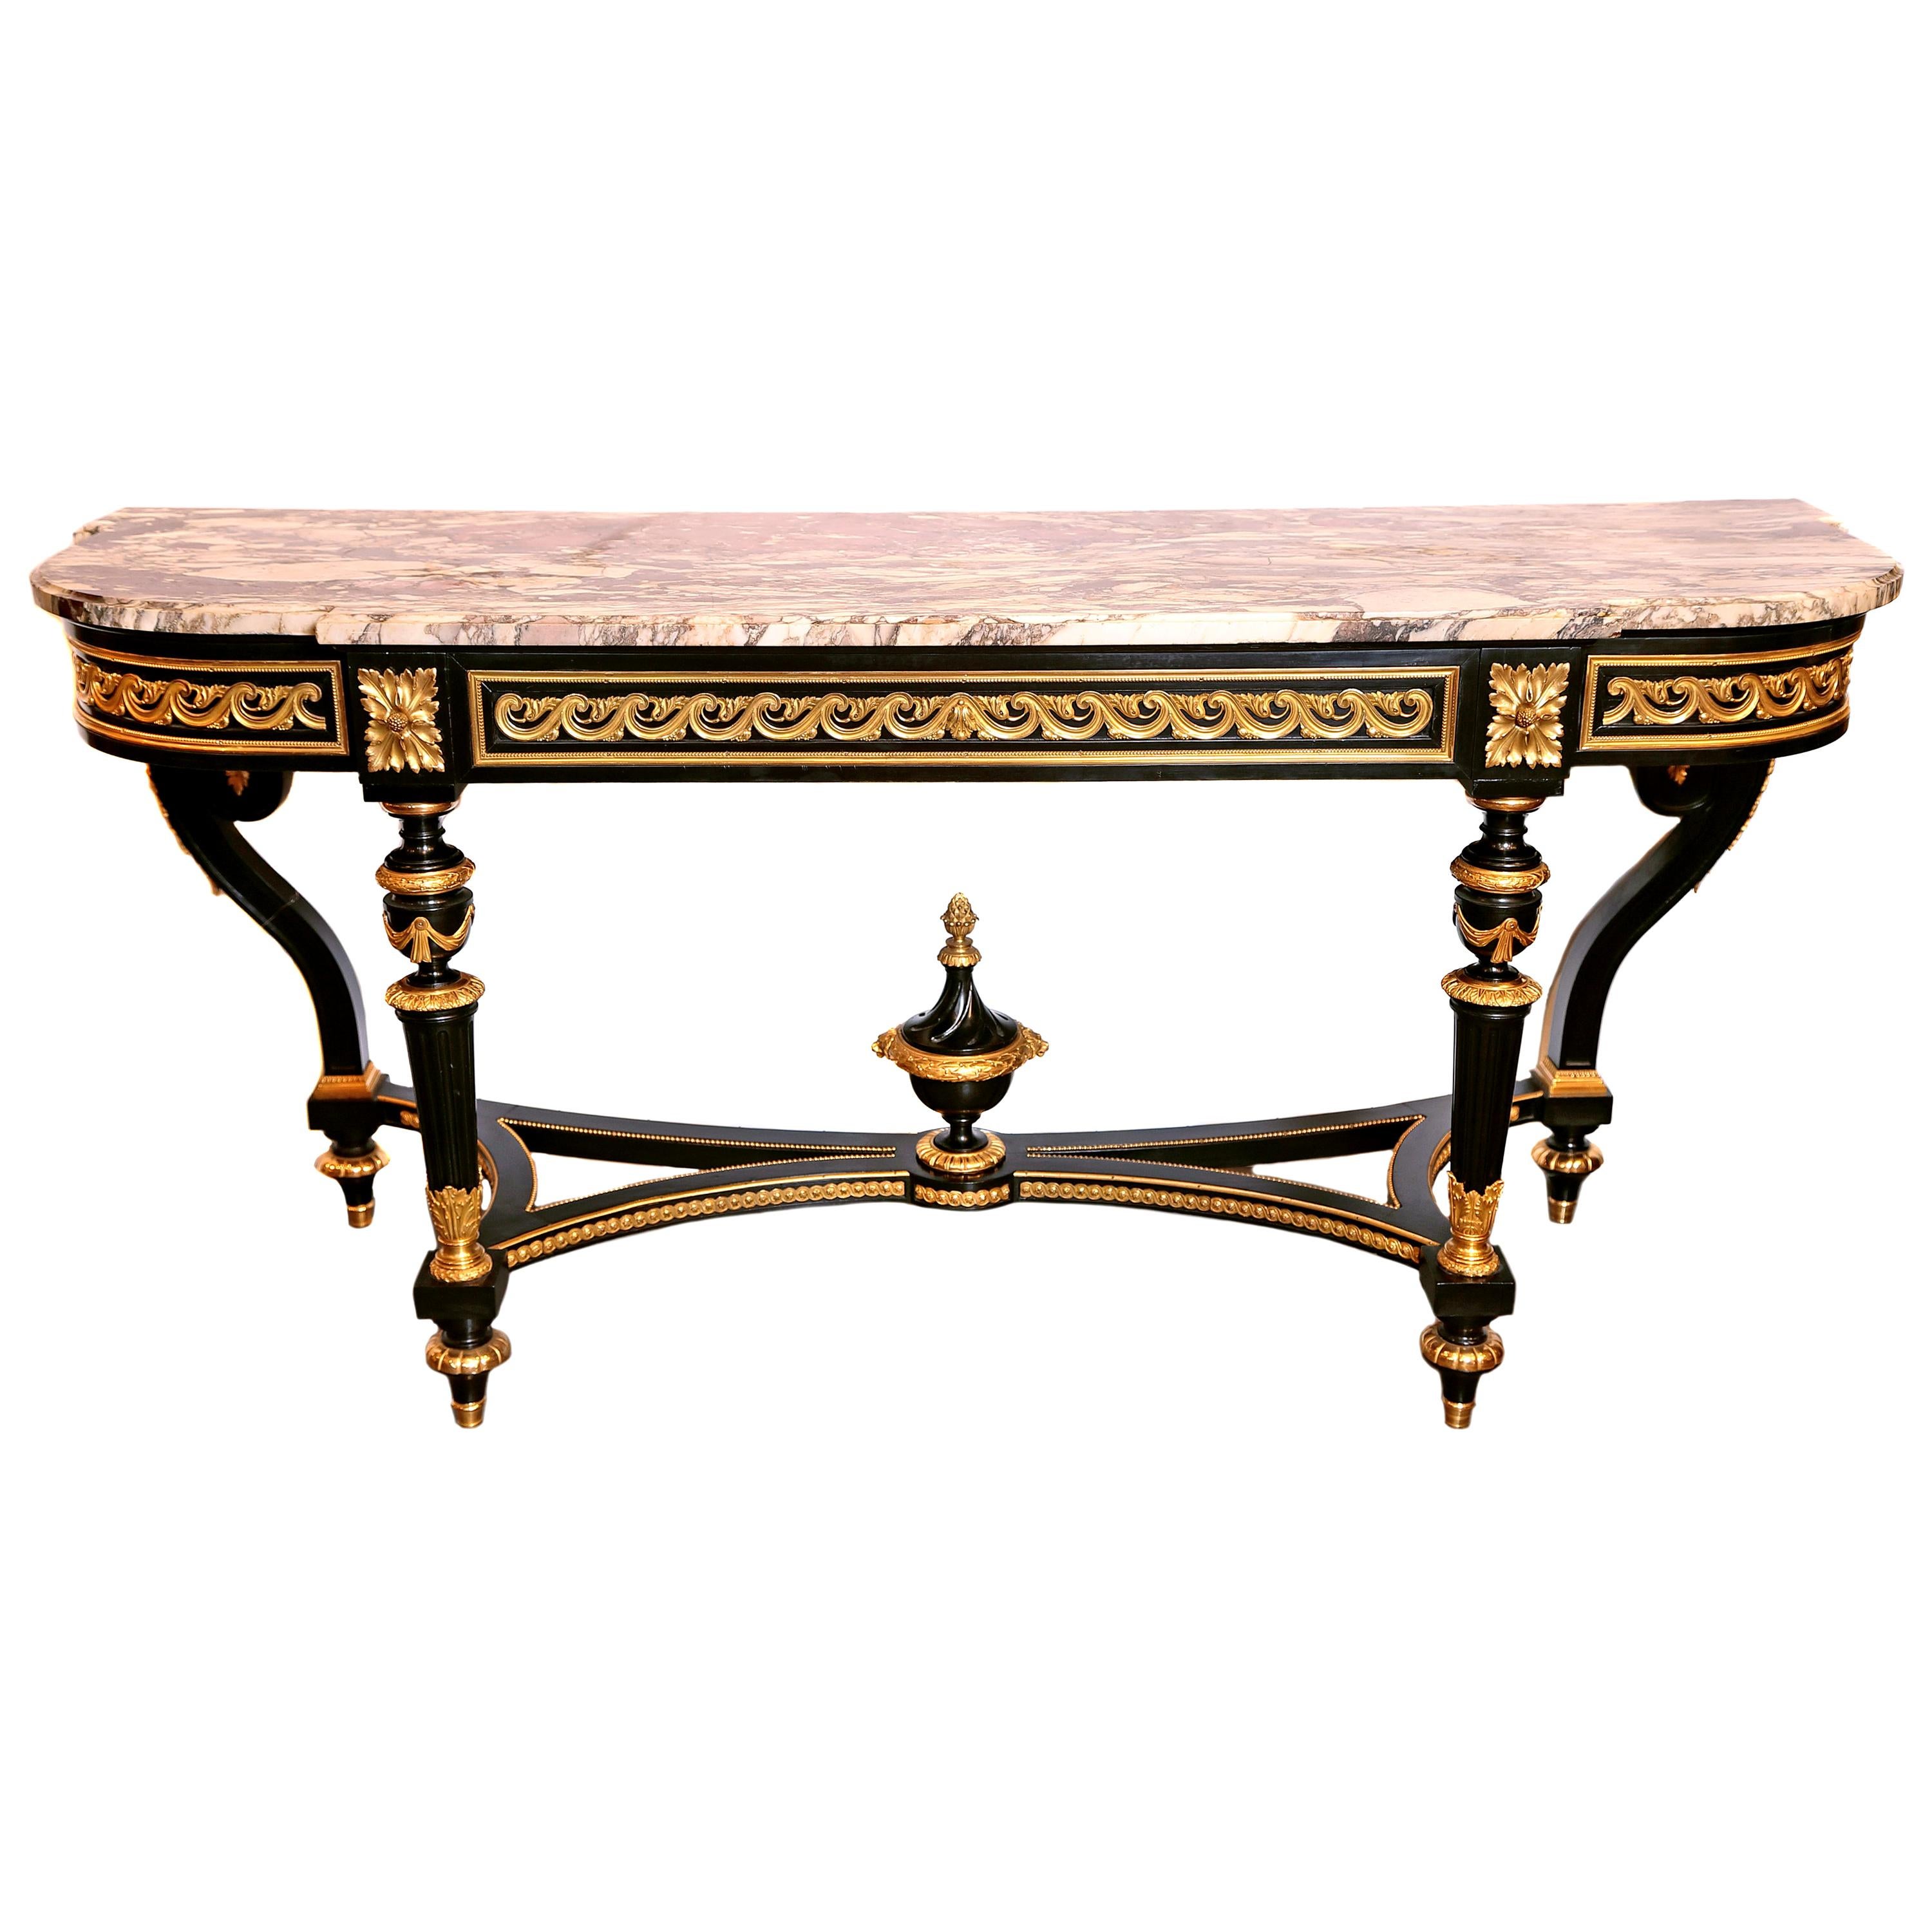 19th Century French Louis XVI Ebonized and Fine Gilt Bronze Marble-Top Console